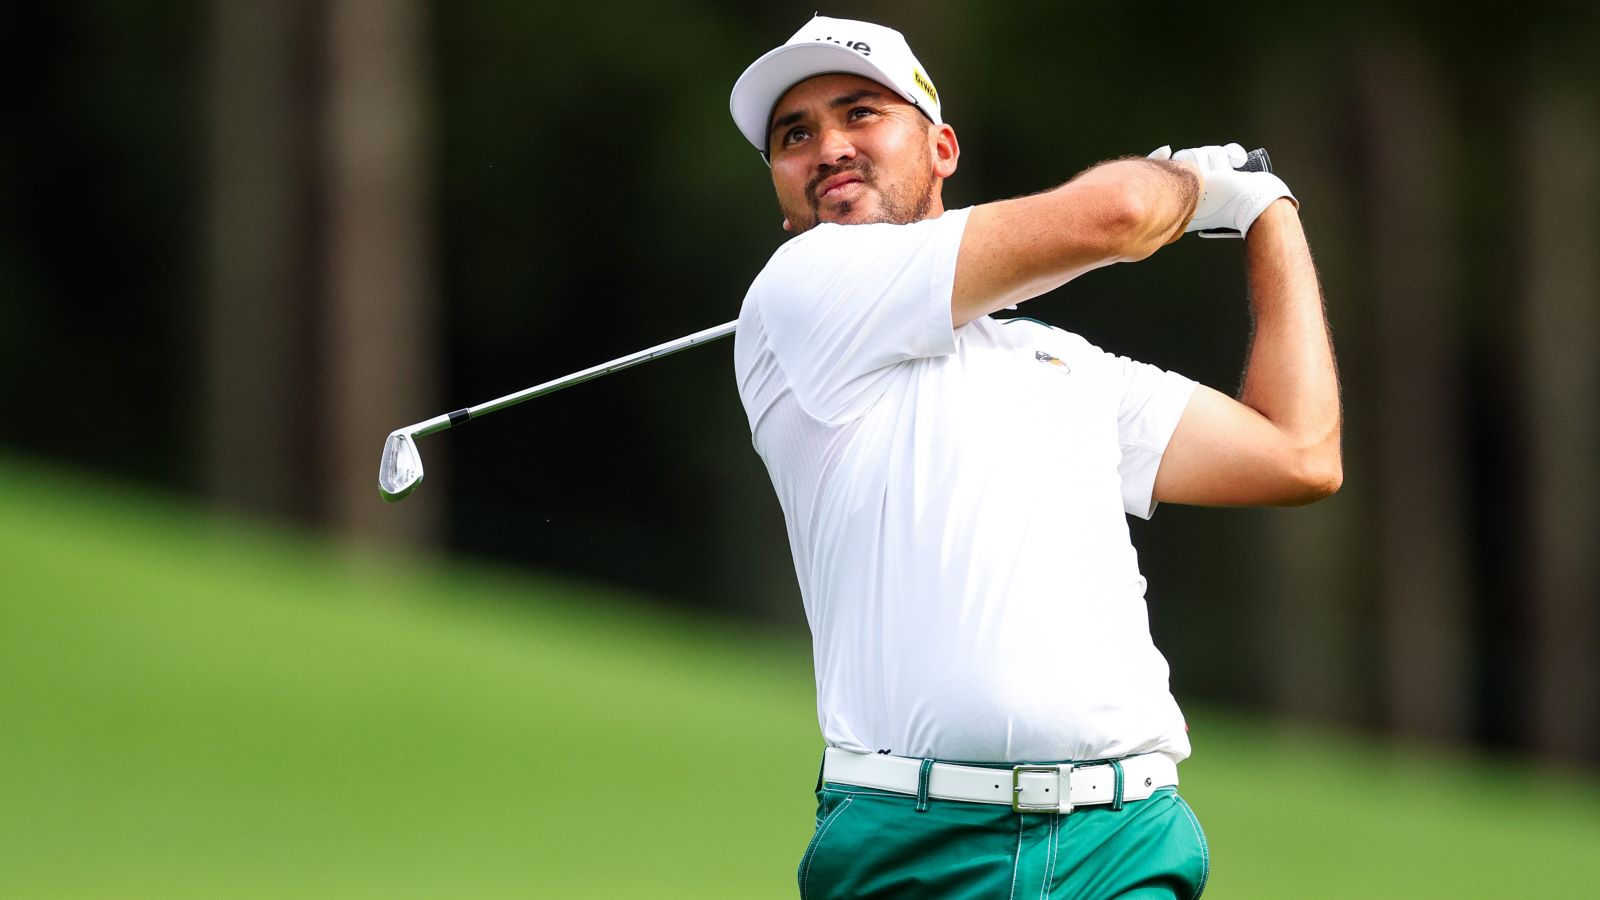 Jason Day tied fifth in $30m PGA Championship tune-up